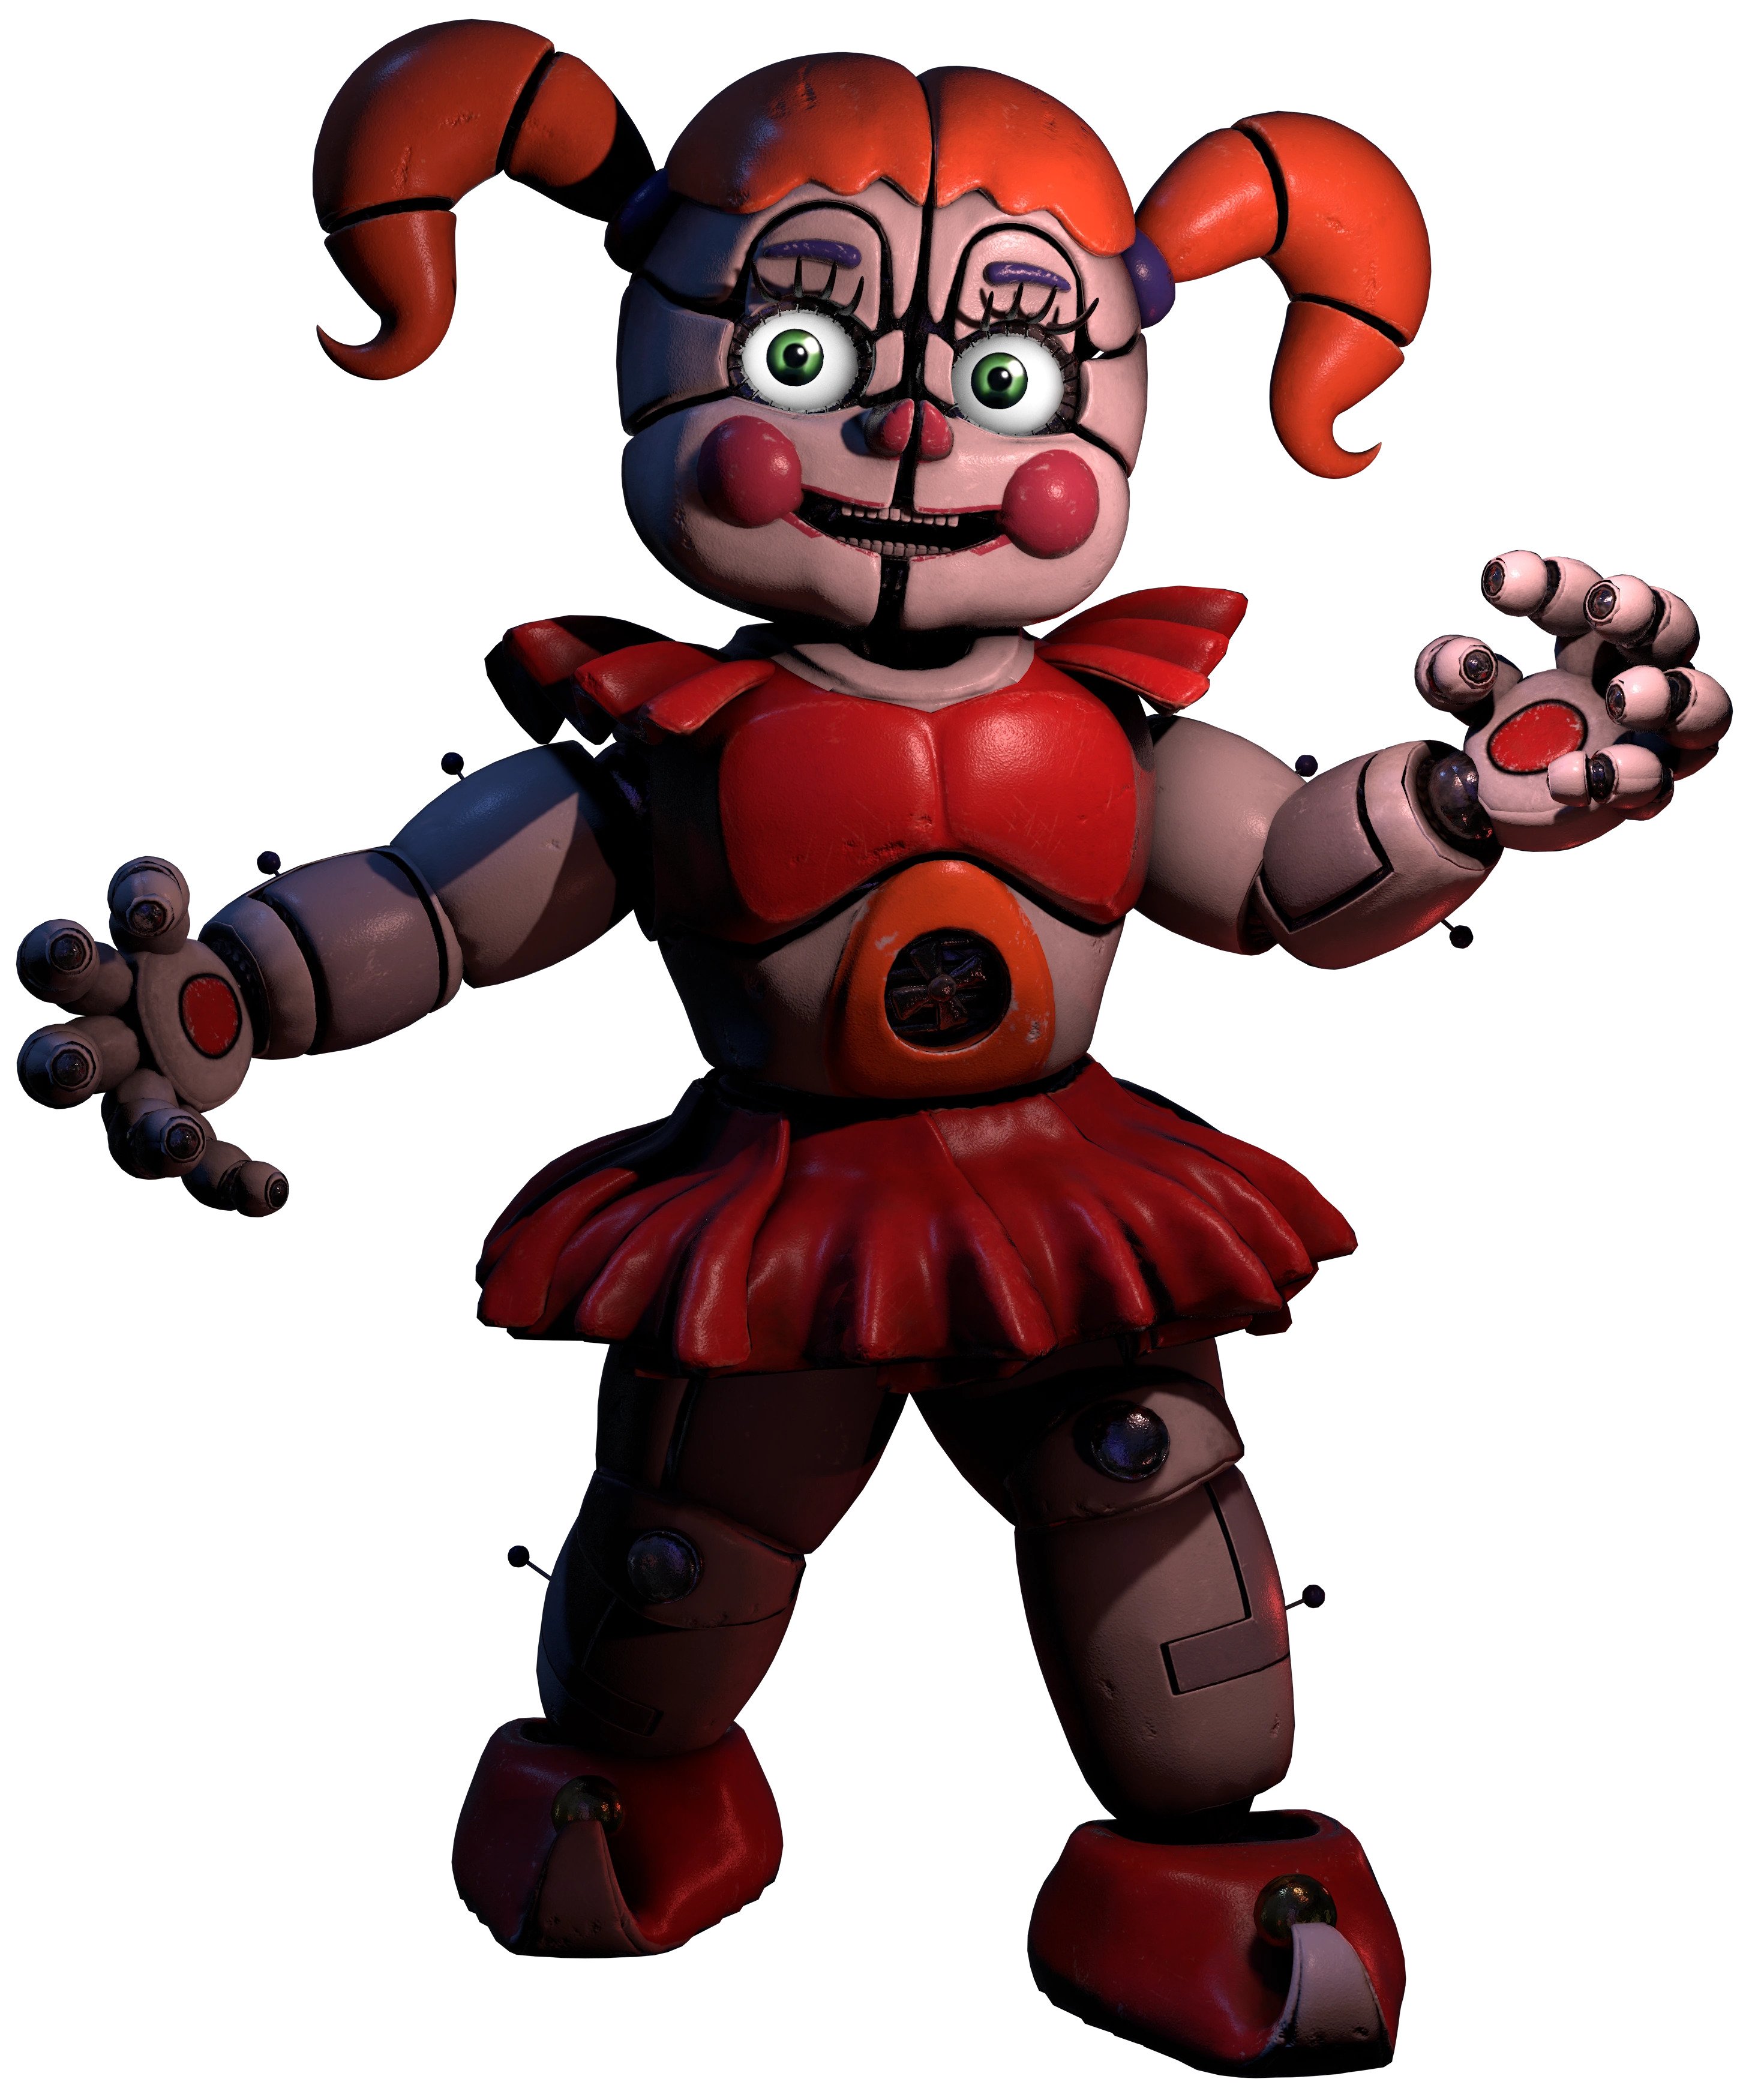 An image of Circus Baby from Five Nights at Freddy's